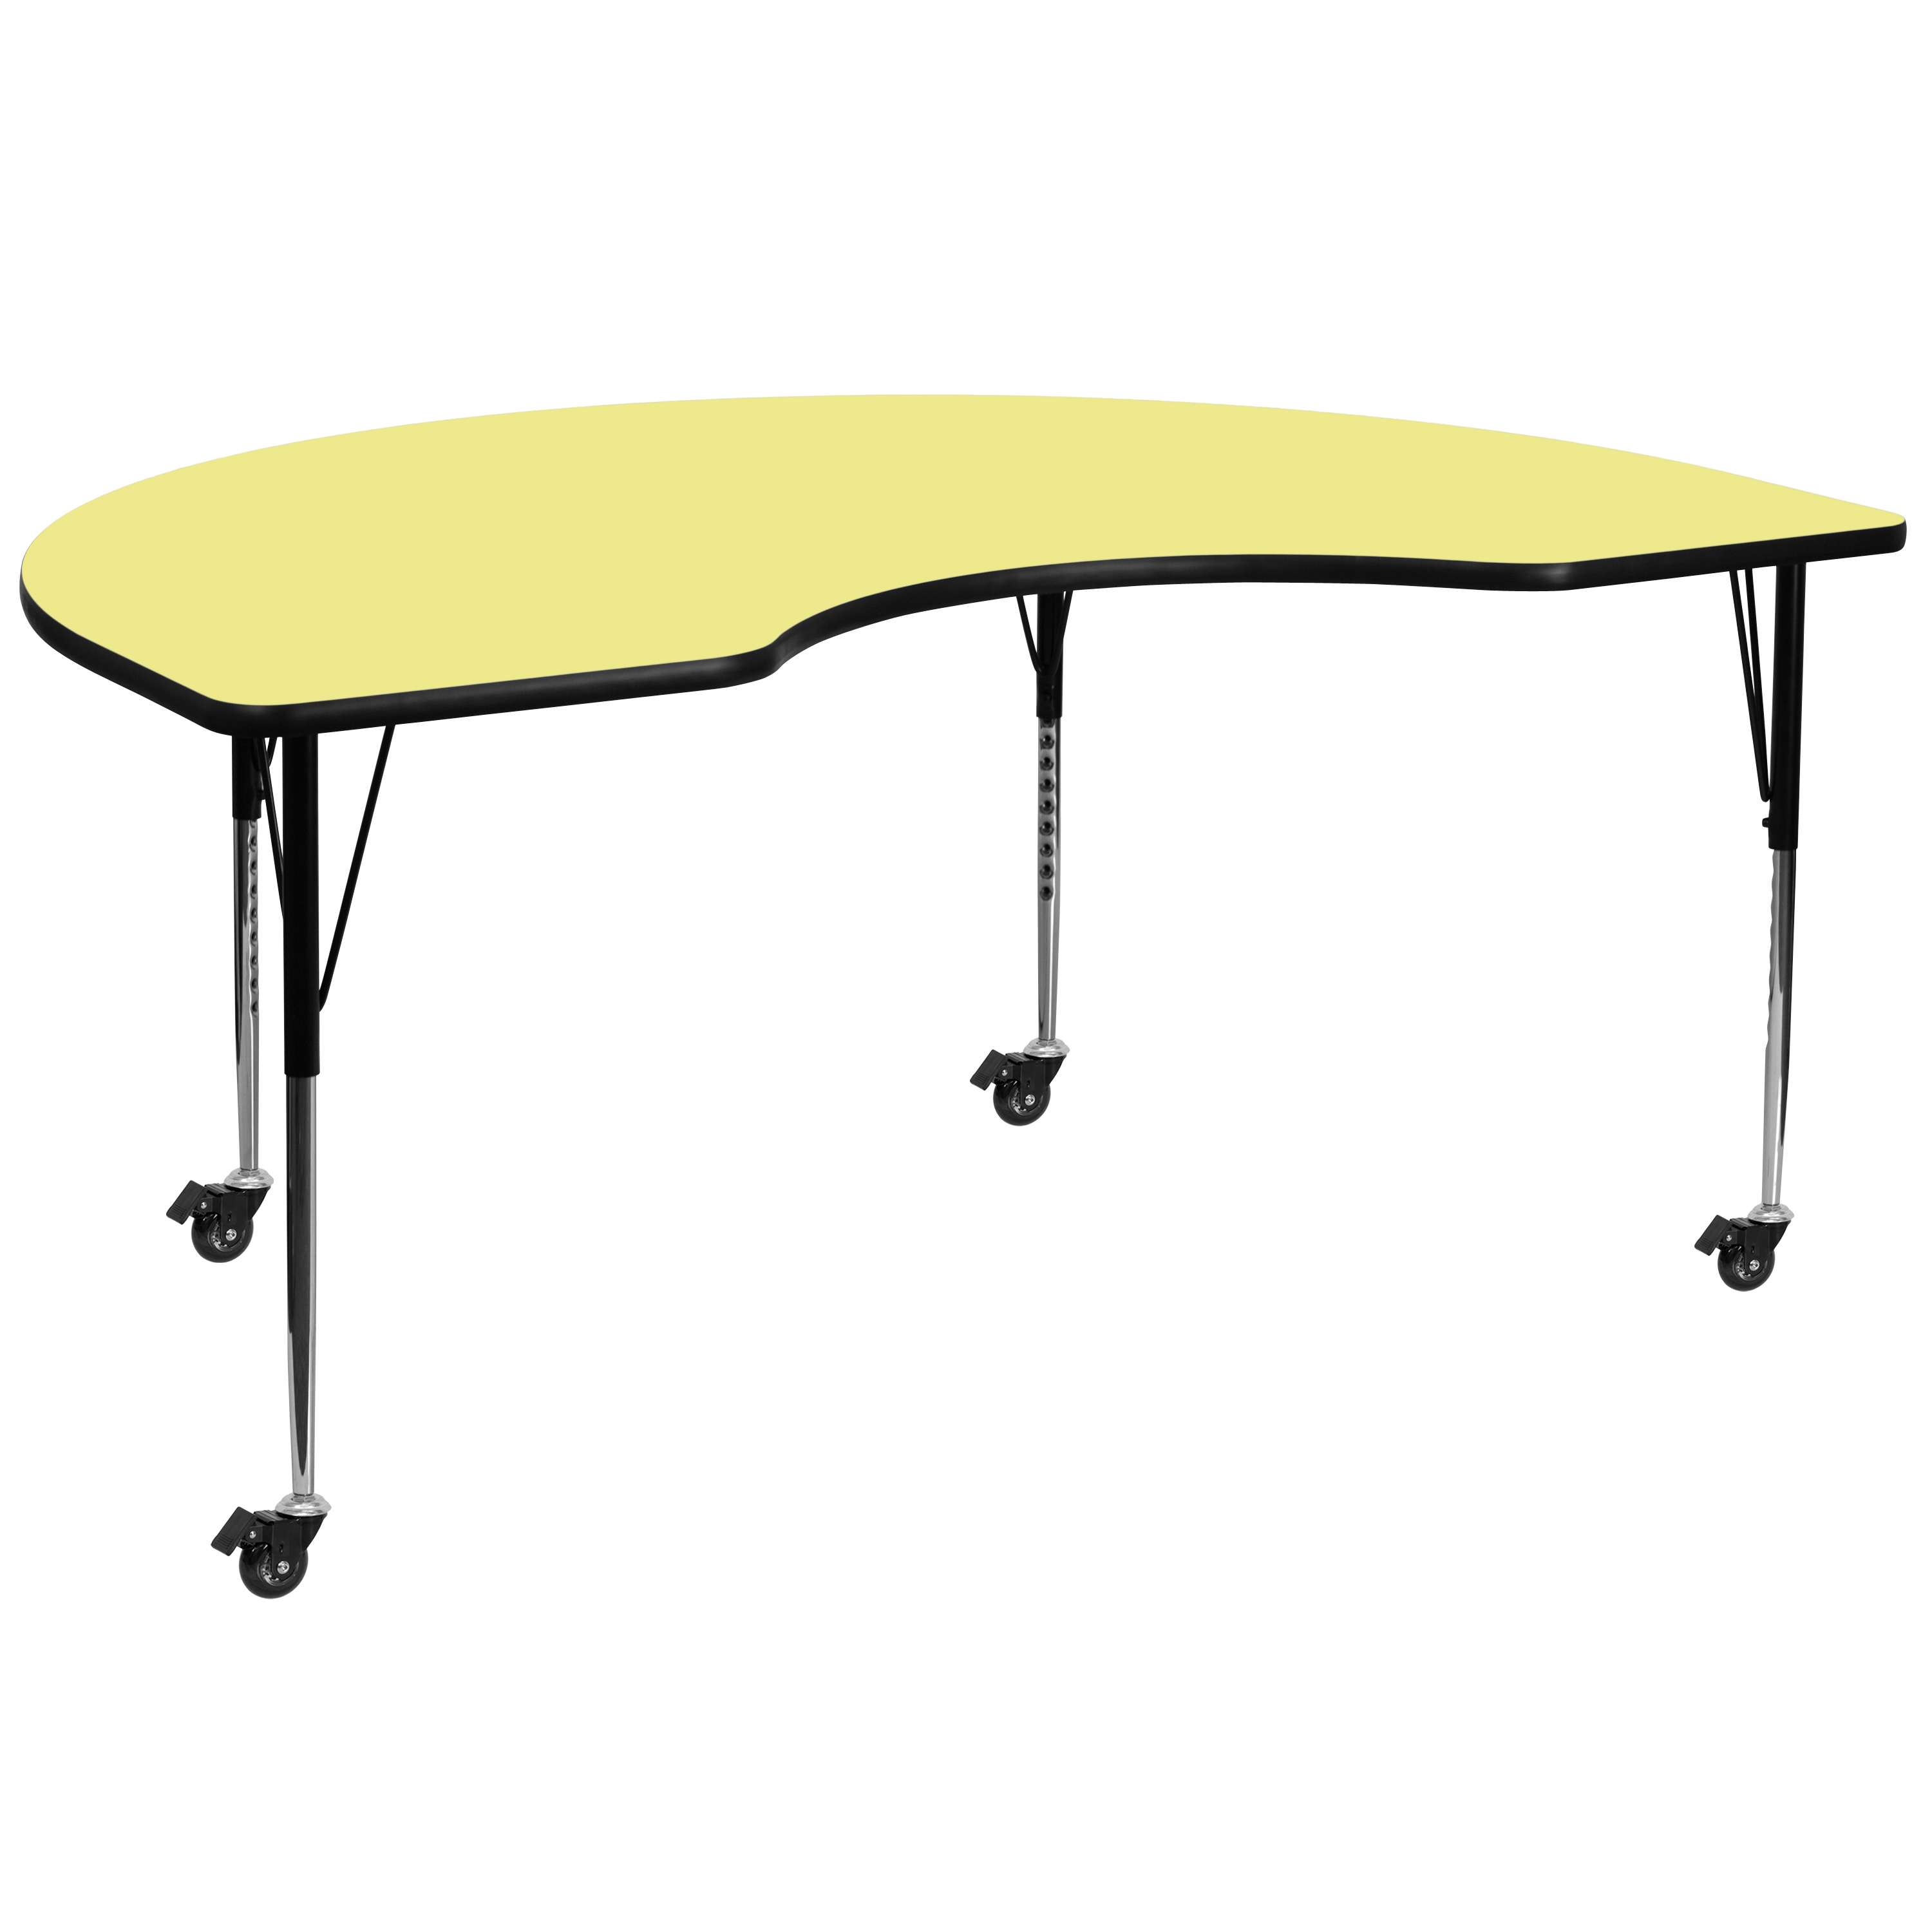 Flash Furniture XU-A4896-KIDNY-YEL-T-A-CAS-GG Mobile 48''W x 96''L Kidney Yellow Laminate Height Adjustable Activity Table